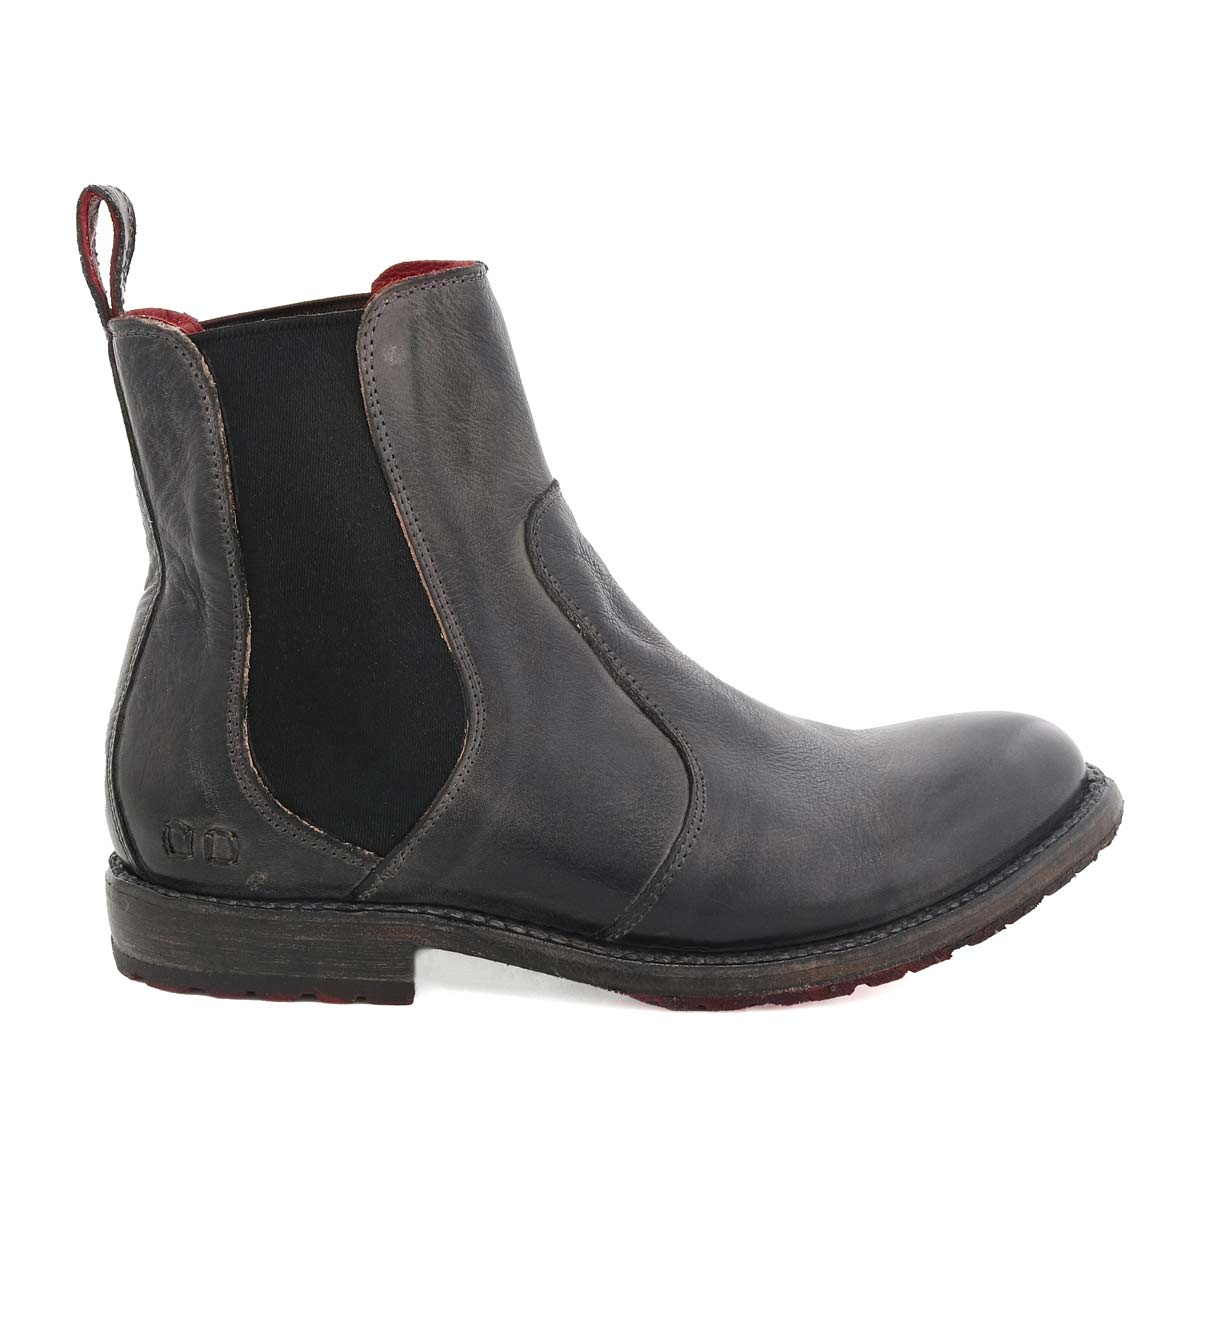 The Nandi by Bed Stu women's black leather chelsea boot.